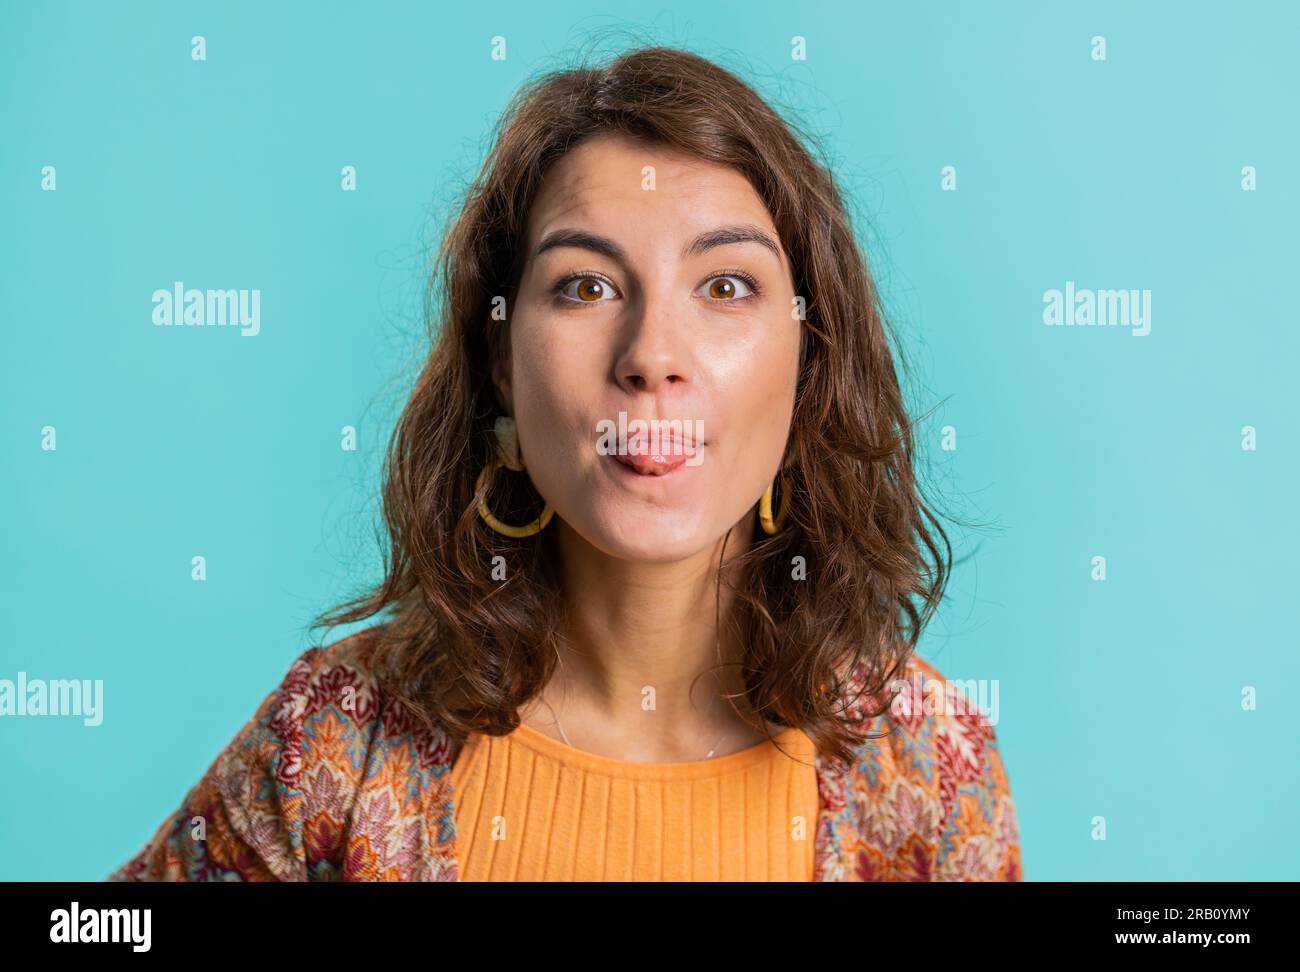 Cheerful funny young woman showing tongue making faces at camera, fooling around, joking, aping with silly face, teasing, bullying, abuse. Girl isolated alone on blue studio background. Lifestyles Stock Photo